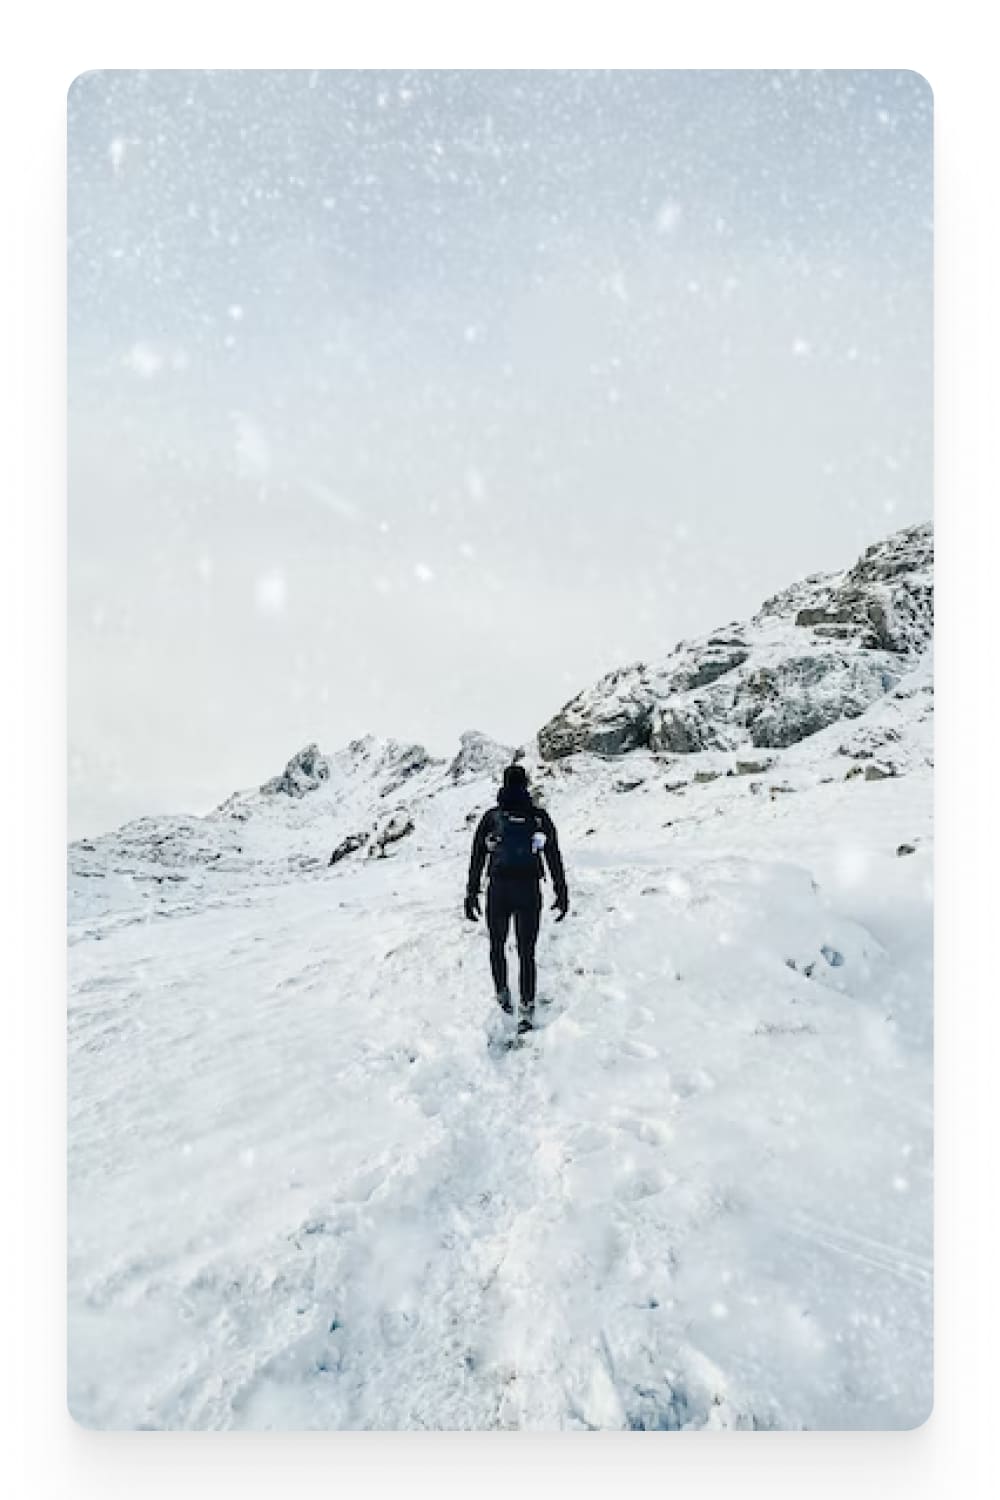 Photo of a hiker on a trail in the snowy mountains.